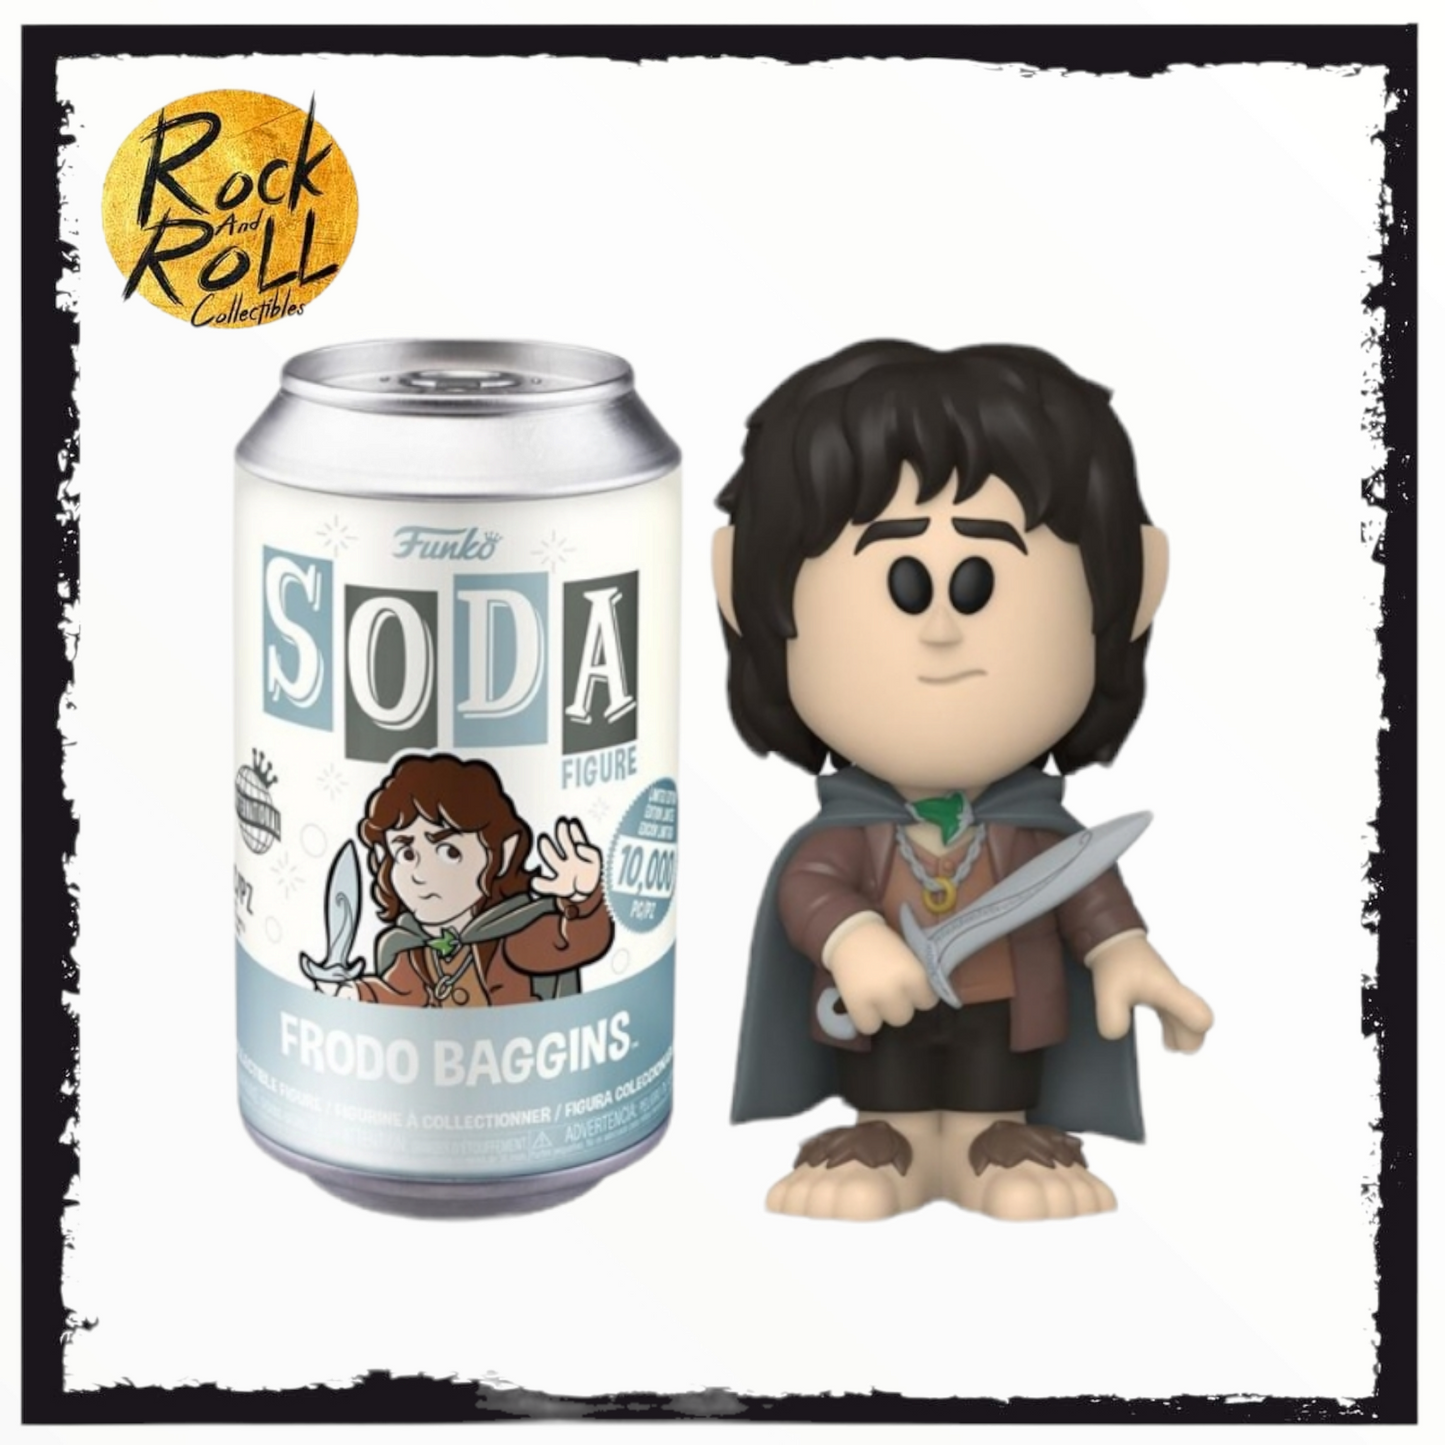 Frodo Baggins Soda with Chance of Chase